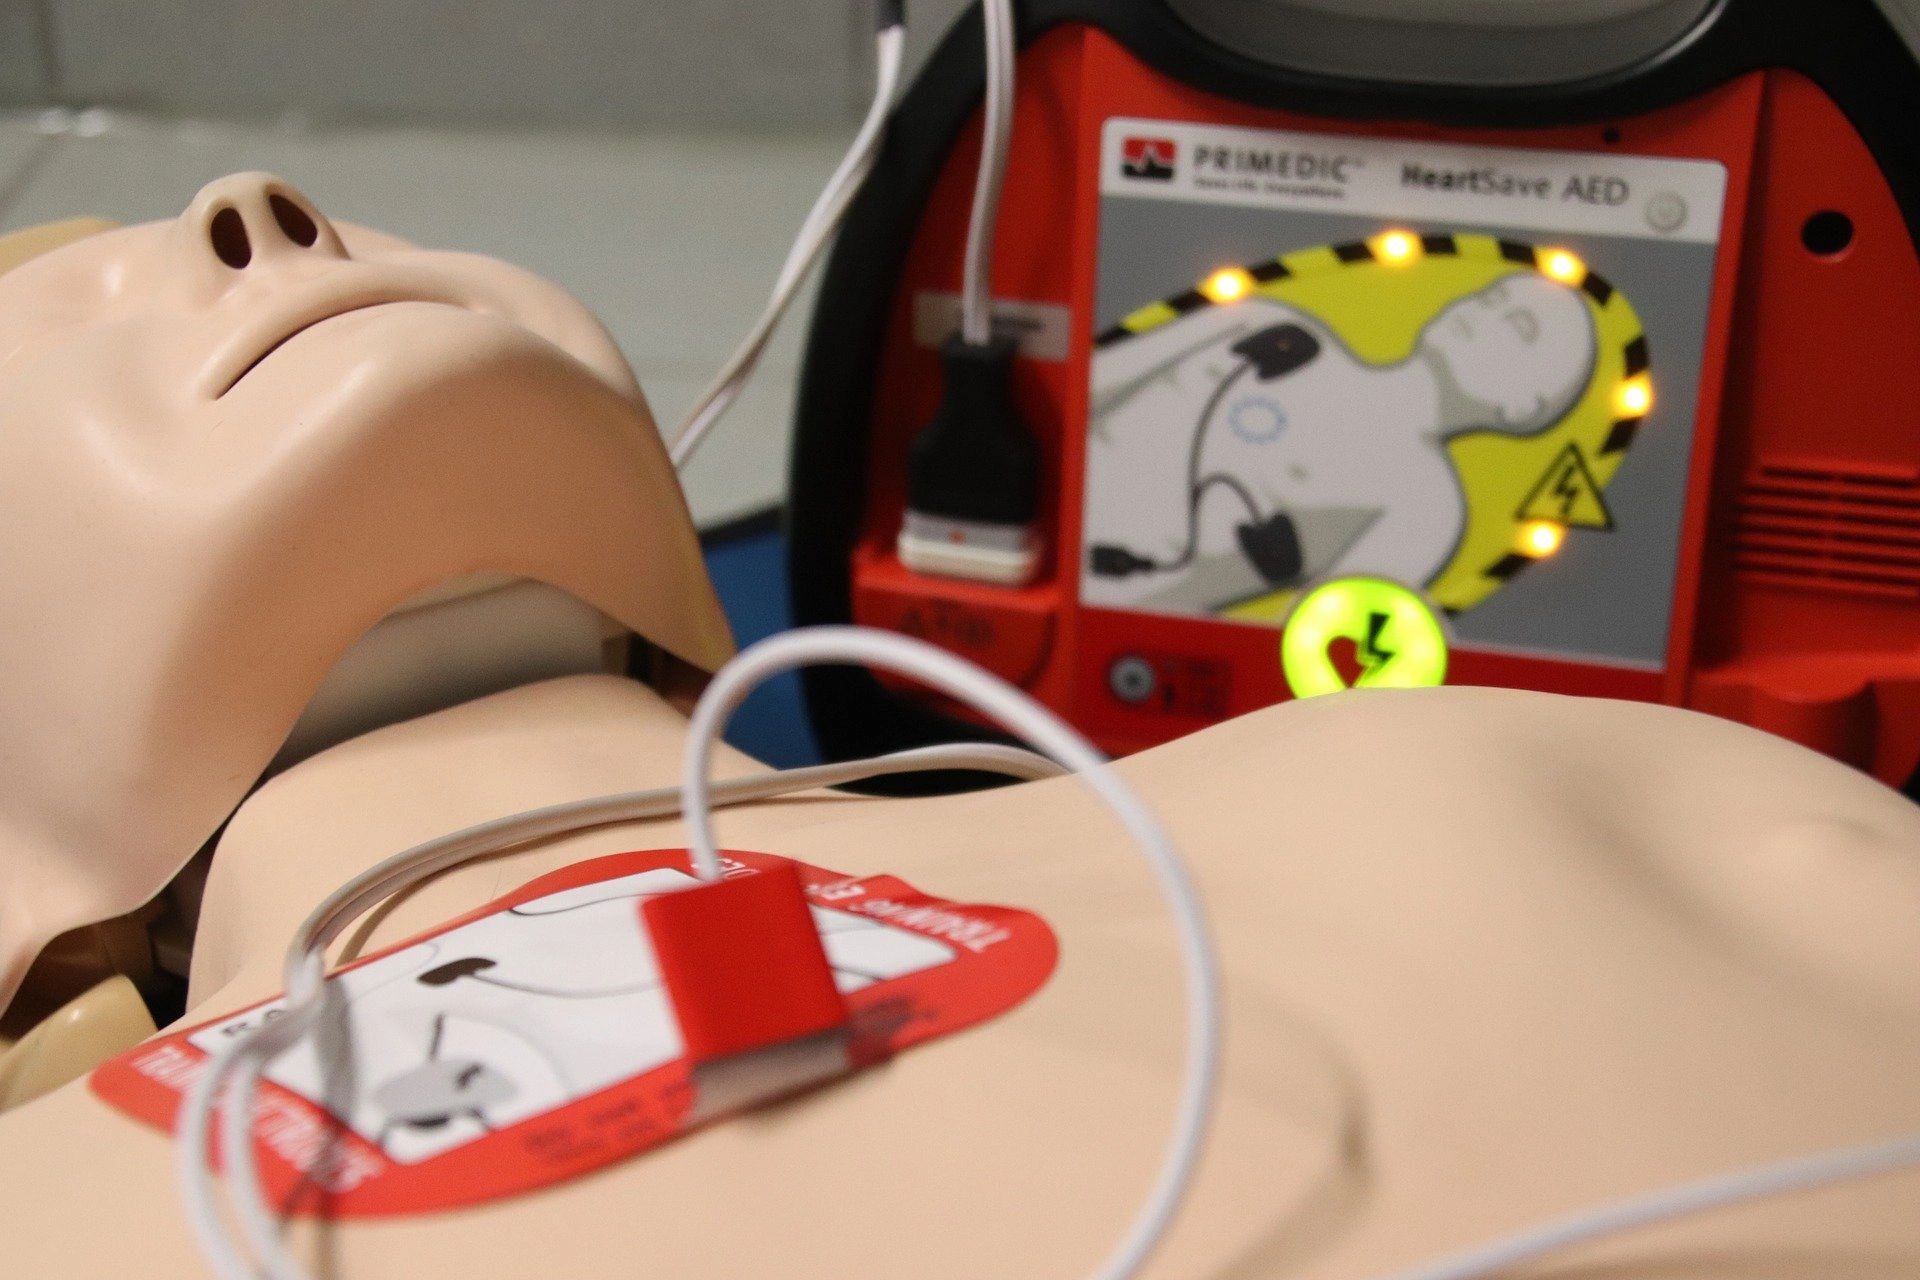 Automated External Defibrillator Training, AED, CPR, BLS training, Greater Manchester